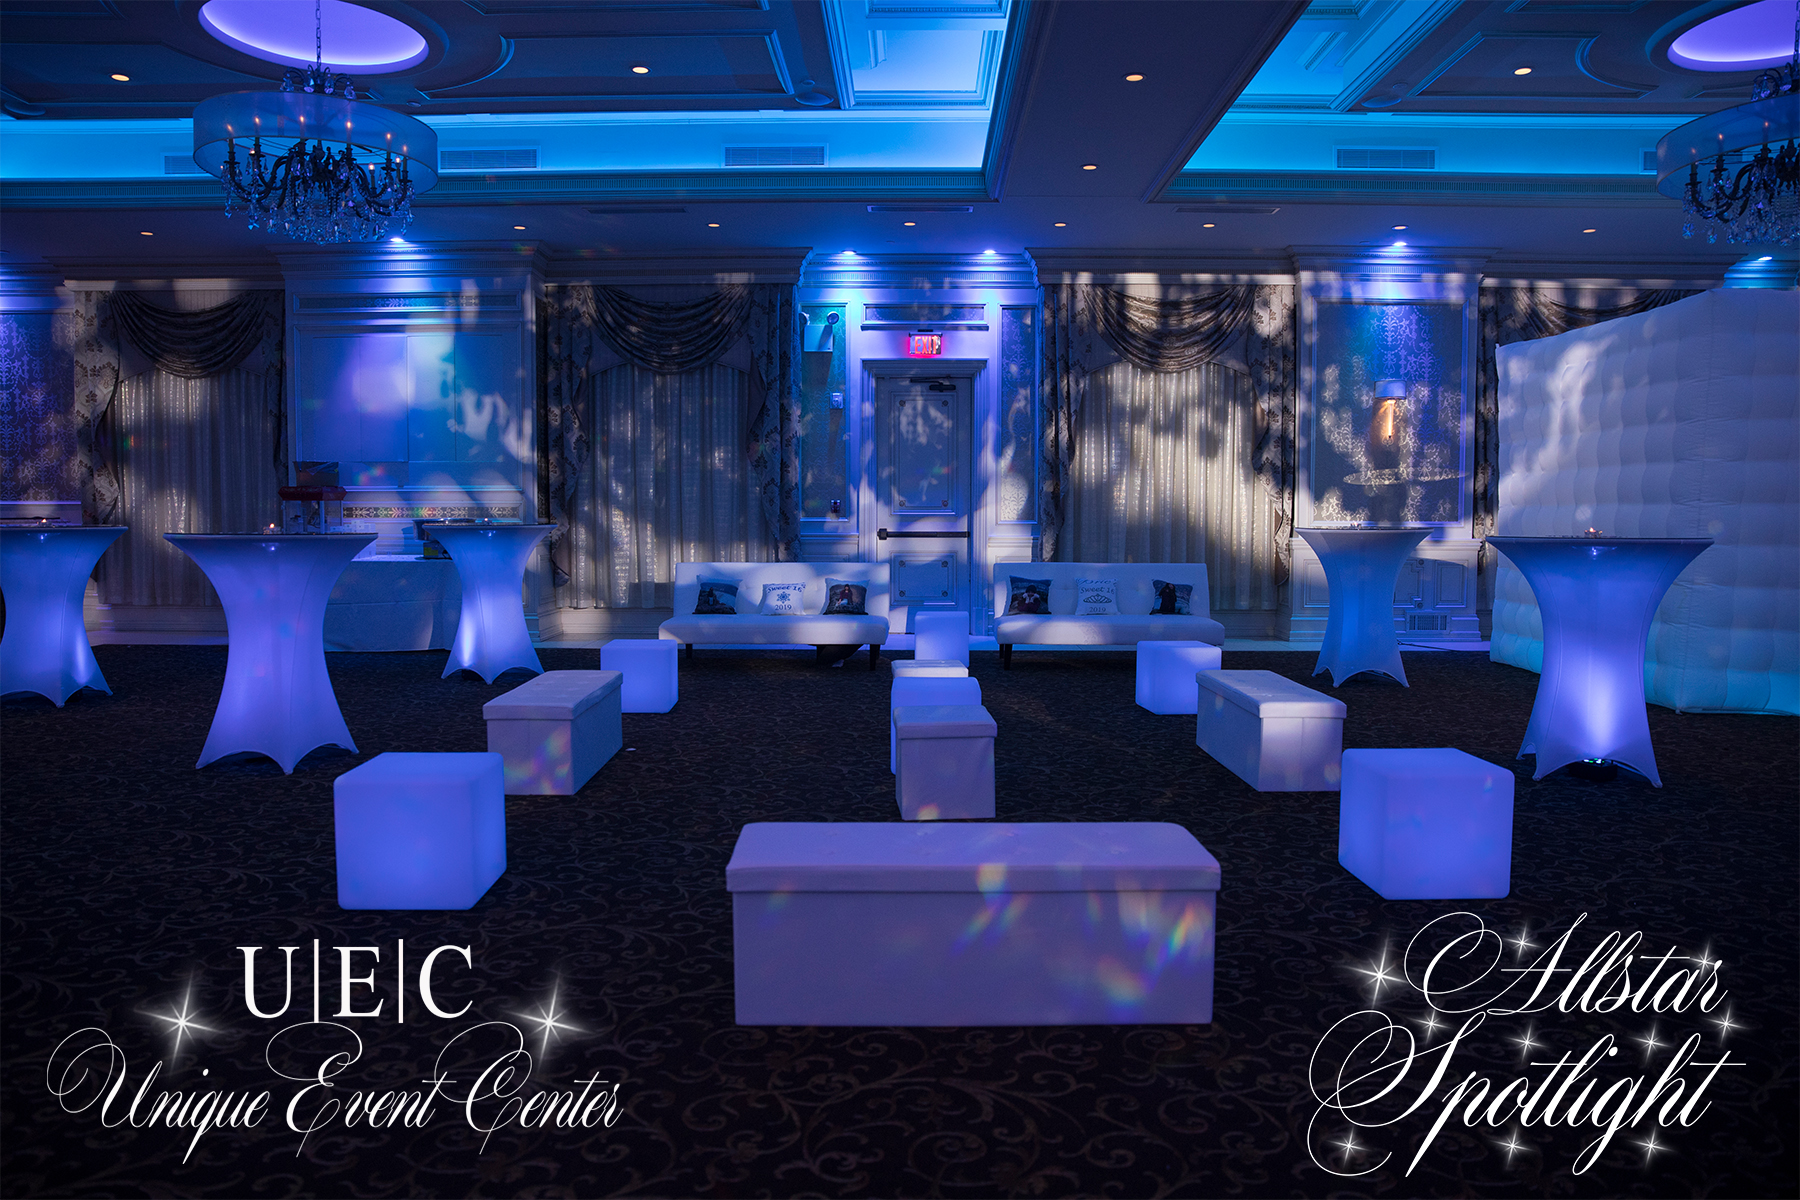 Unique Event Center We are a event planning service based in New